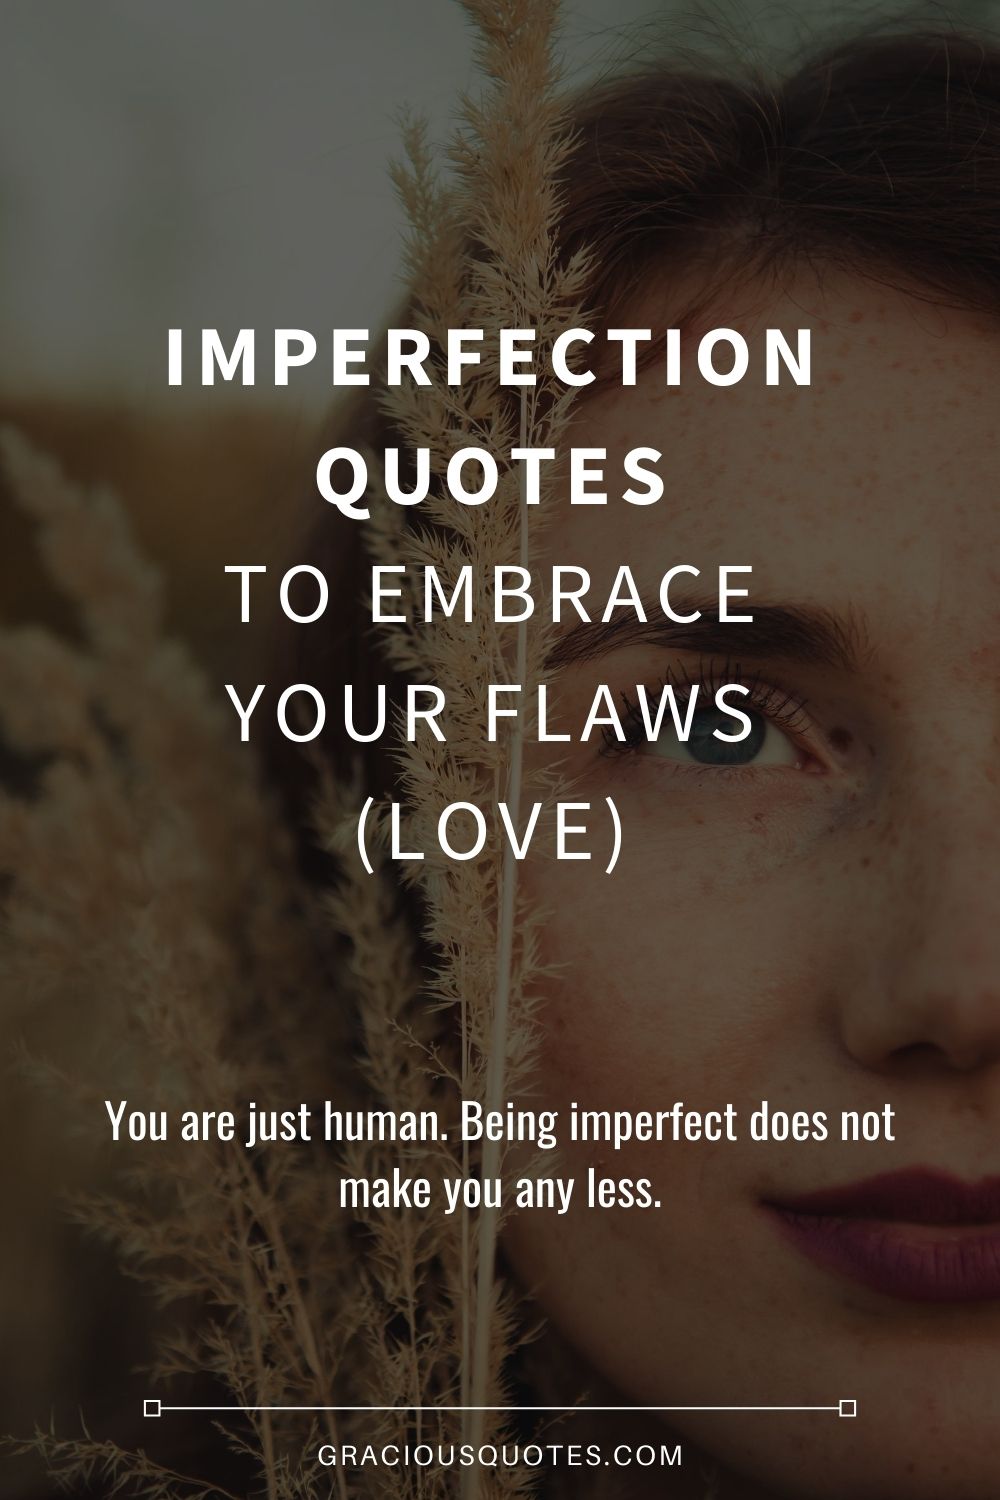 quotes about imperfection and beauty